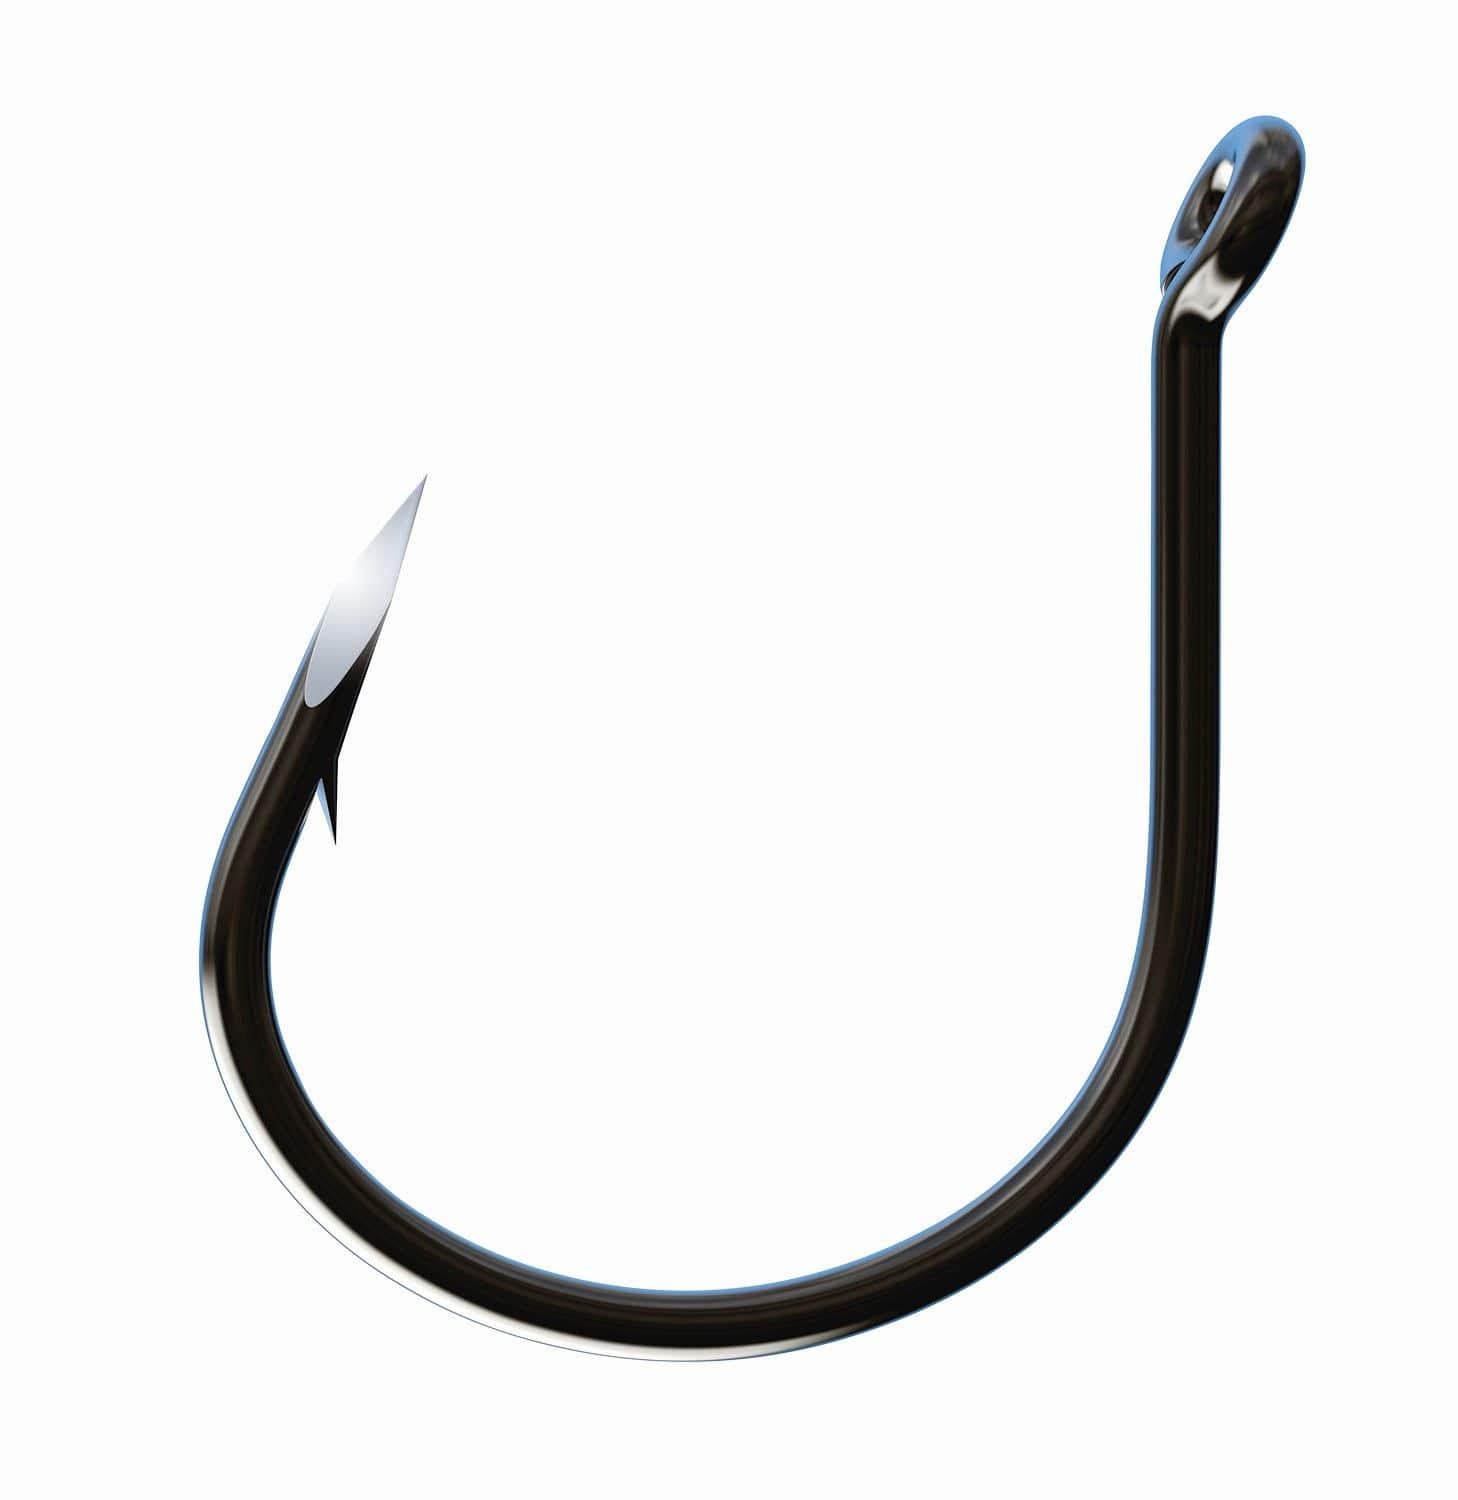 https://media-www.canadiantire.ca/product/playing/fishing/fishing-lures/1784193/eagle-claw-ww-wide-gap-hook-size-1-5c500cfc-cc7a-44cf-9249-b4be003fd191-jpgrendition.jpg